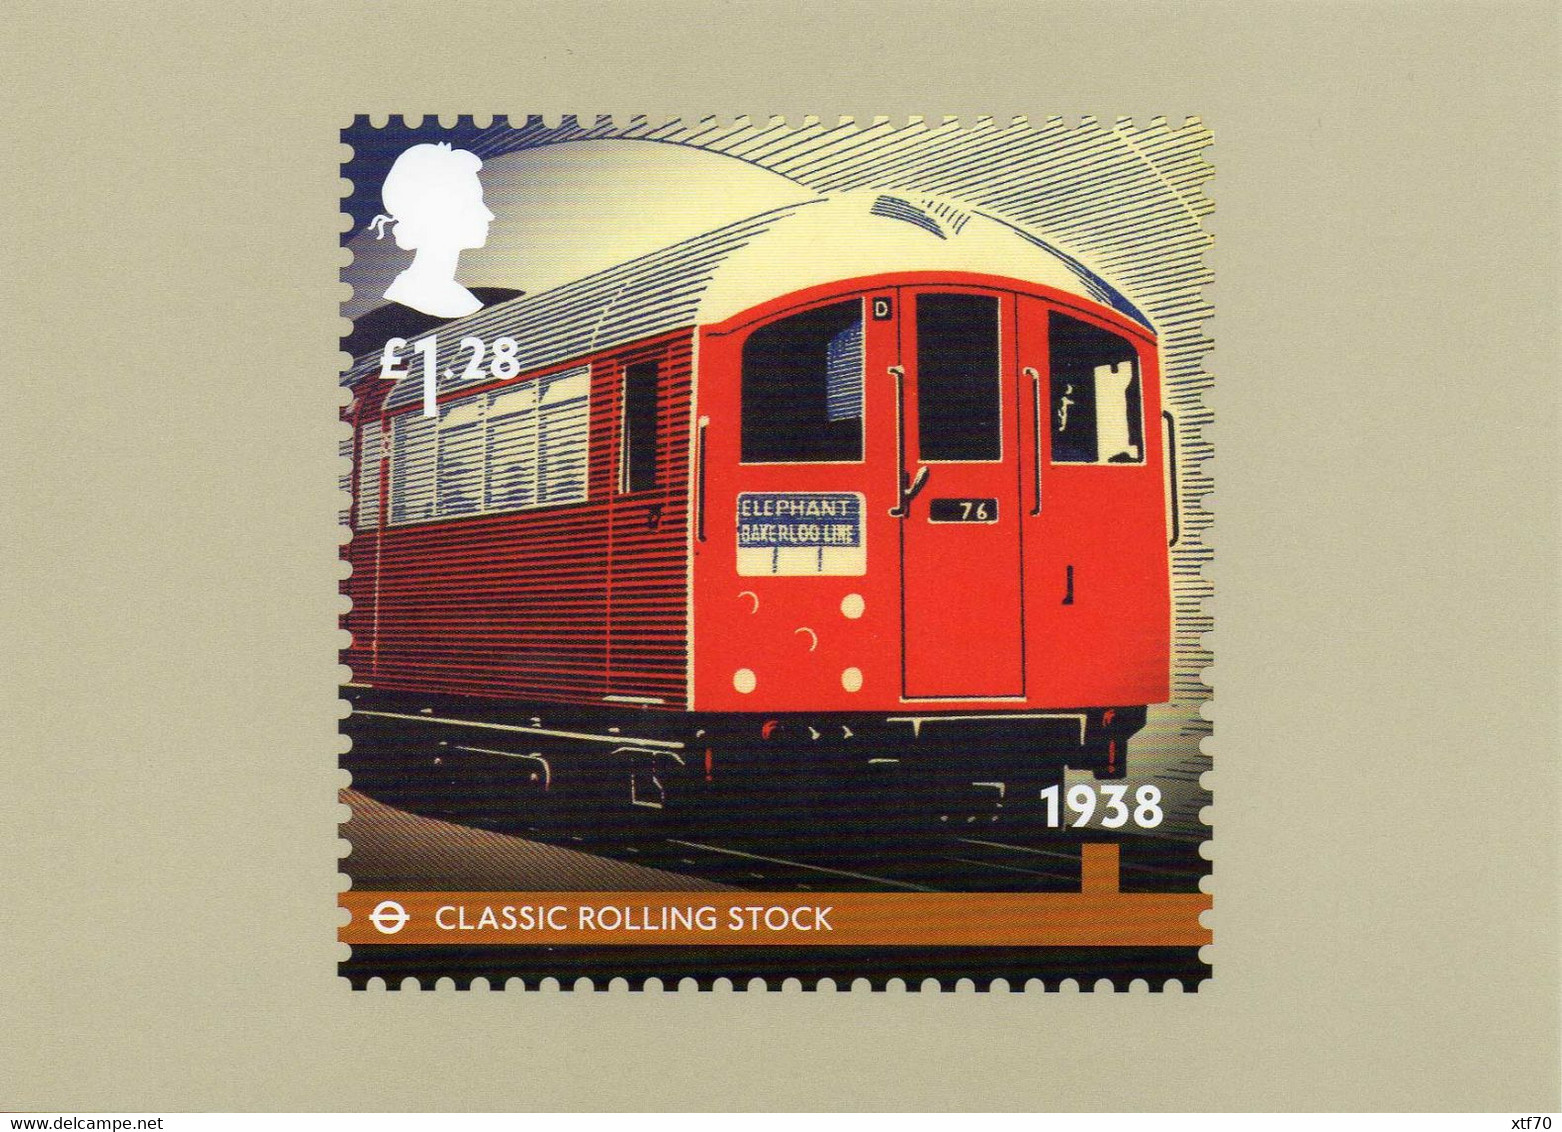 GREAT BRITAIN 2013 150th Anniversary of the London Underground mint PHQ cards